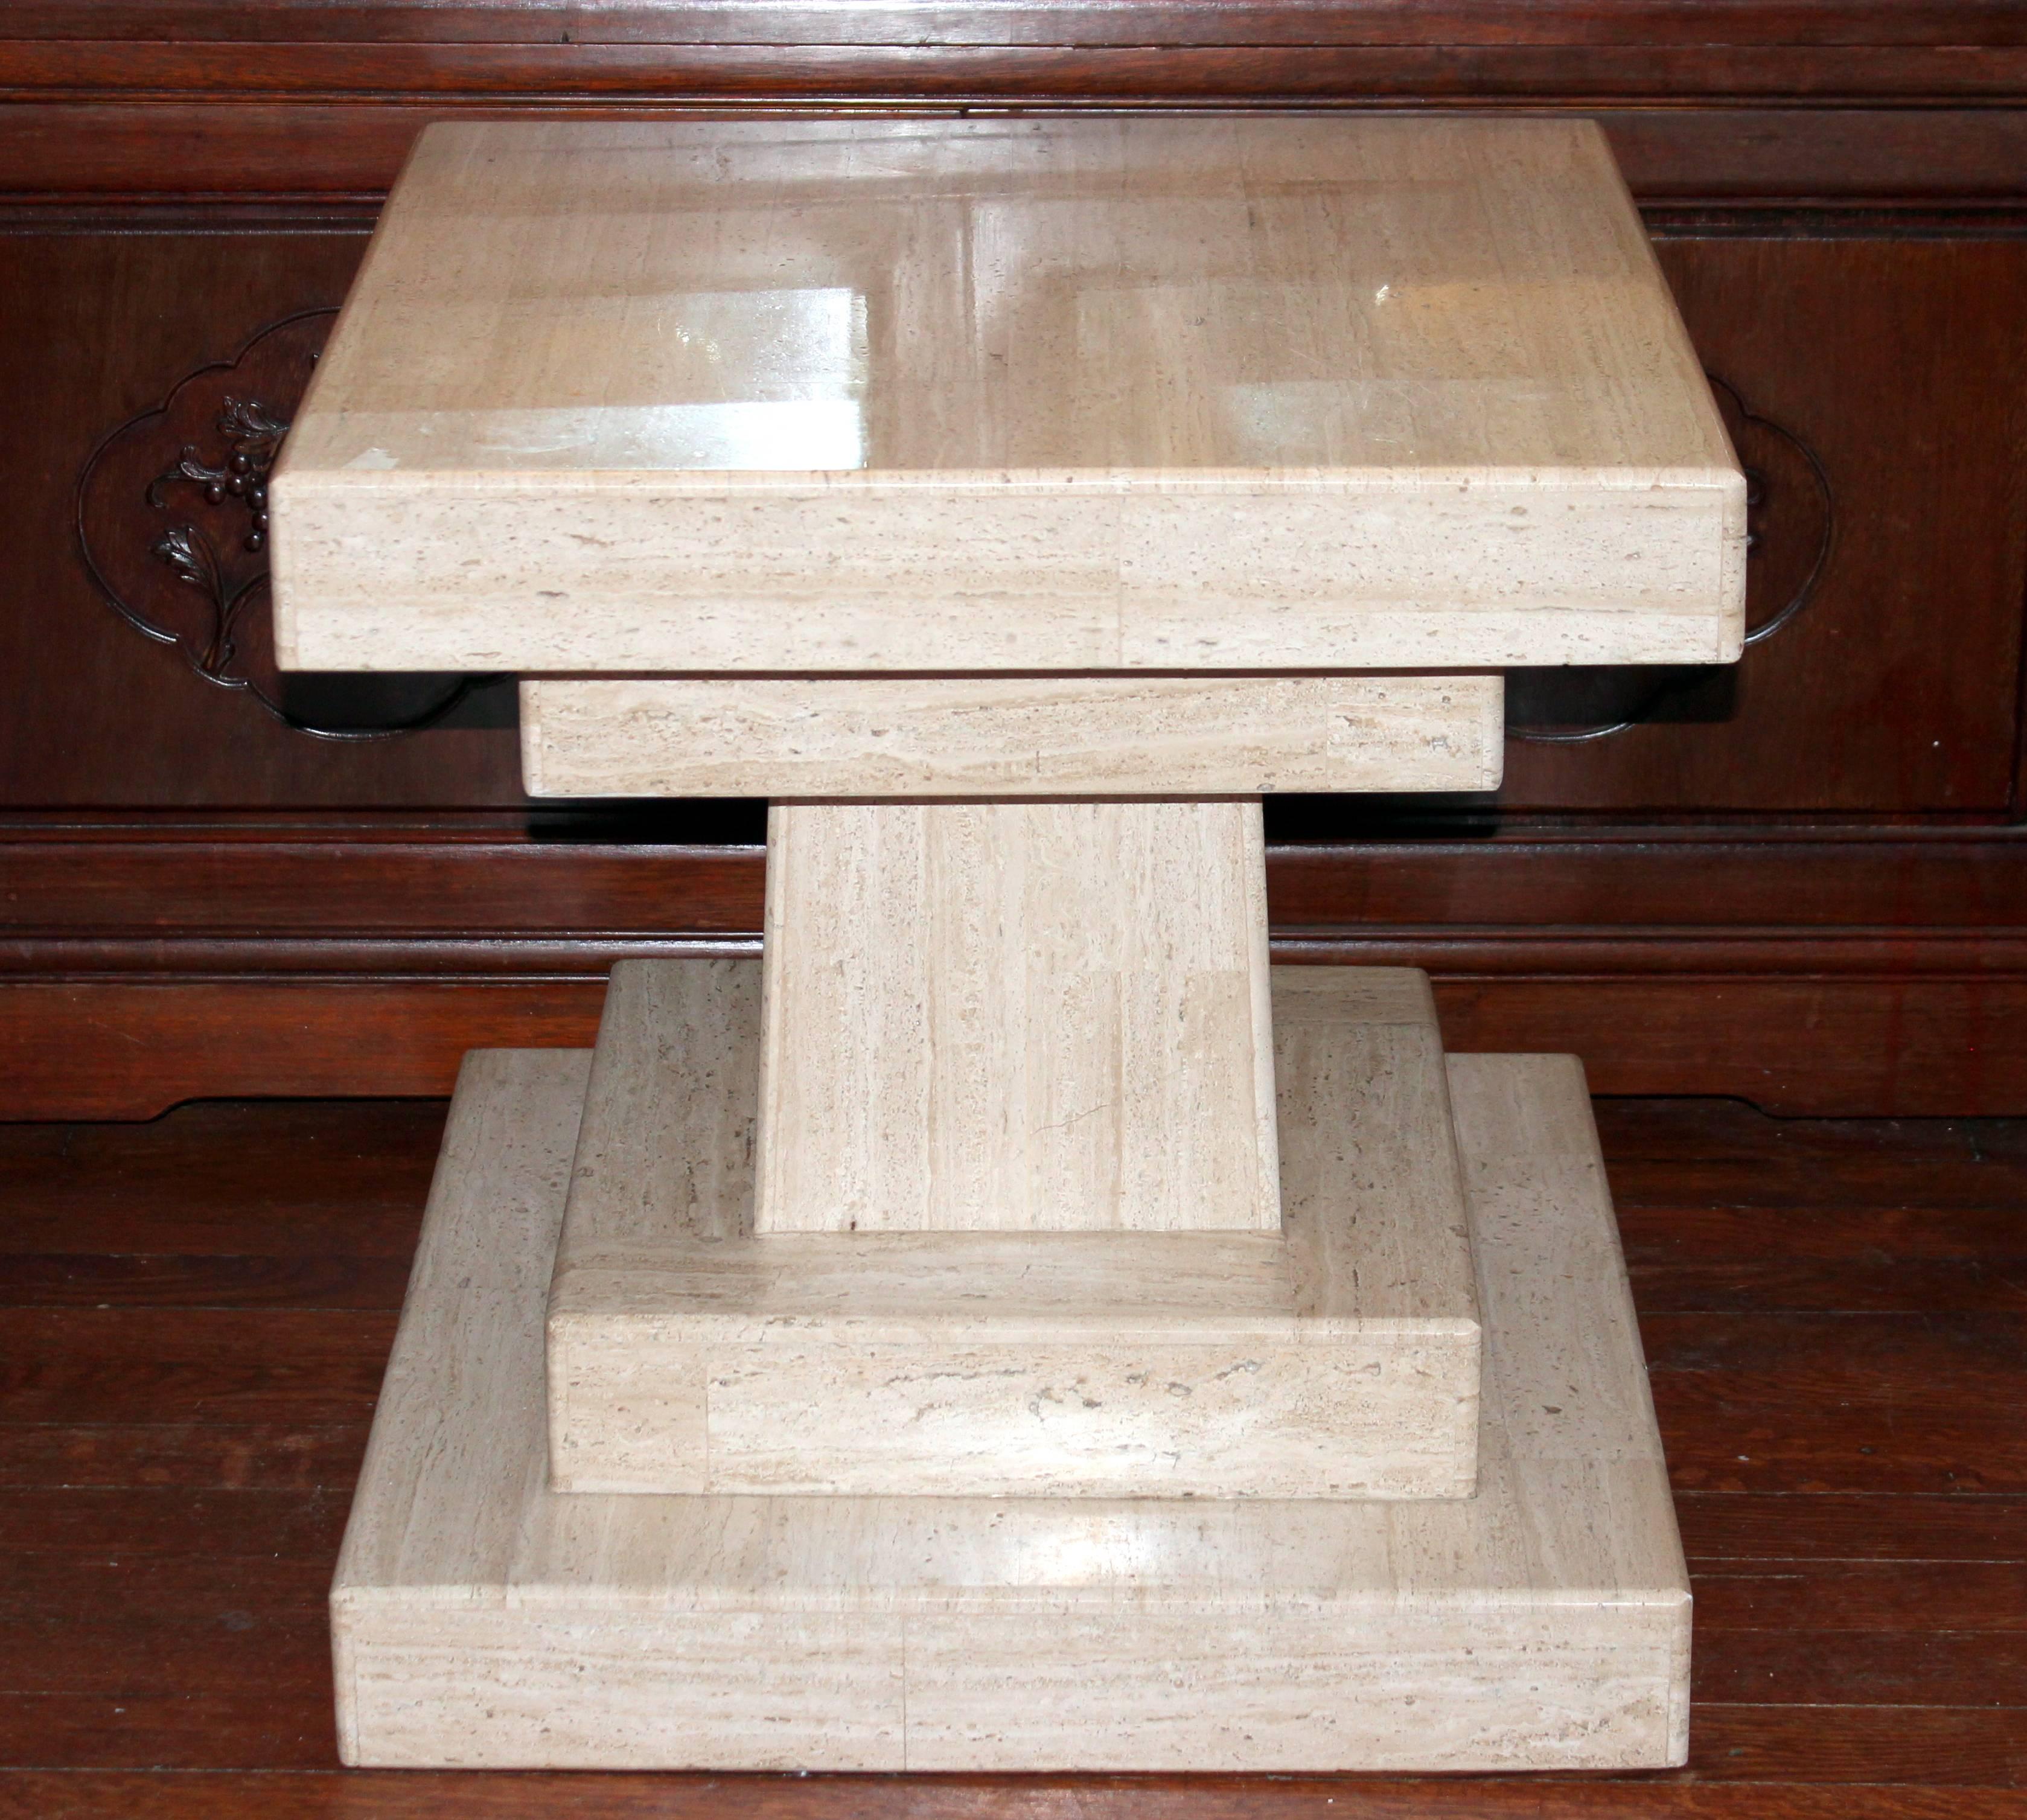 Vintage midcentury travertine side table or pedestal, circa 1970s. Interesting geometric form with soothing natural material. Tapered center support is nice detail. 21